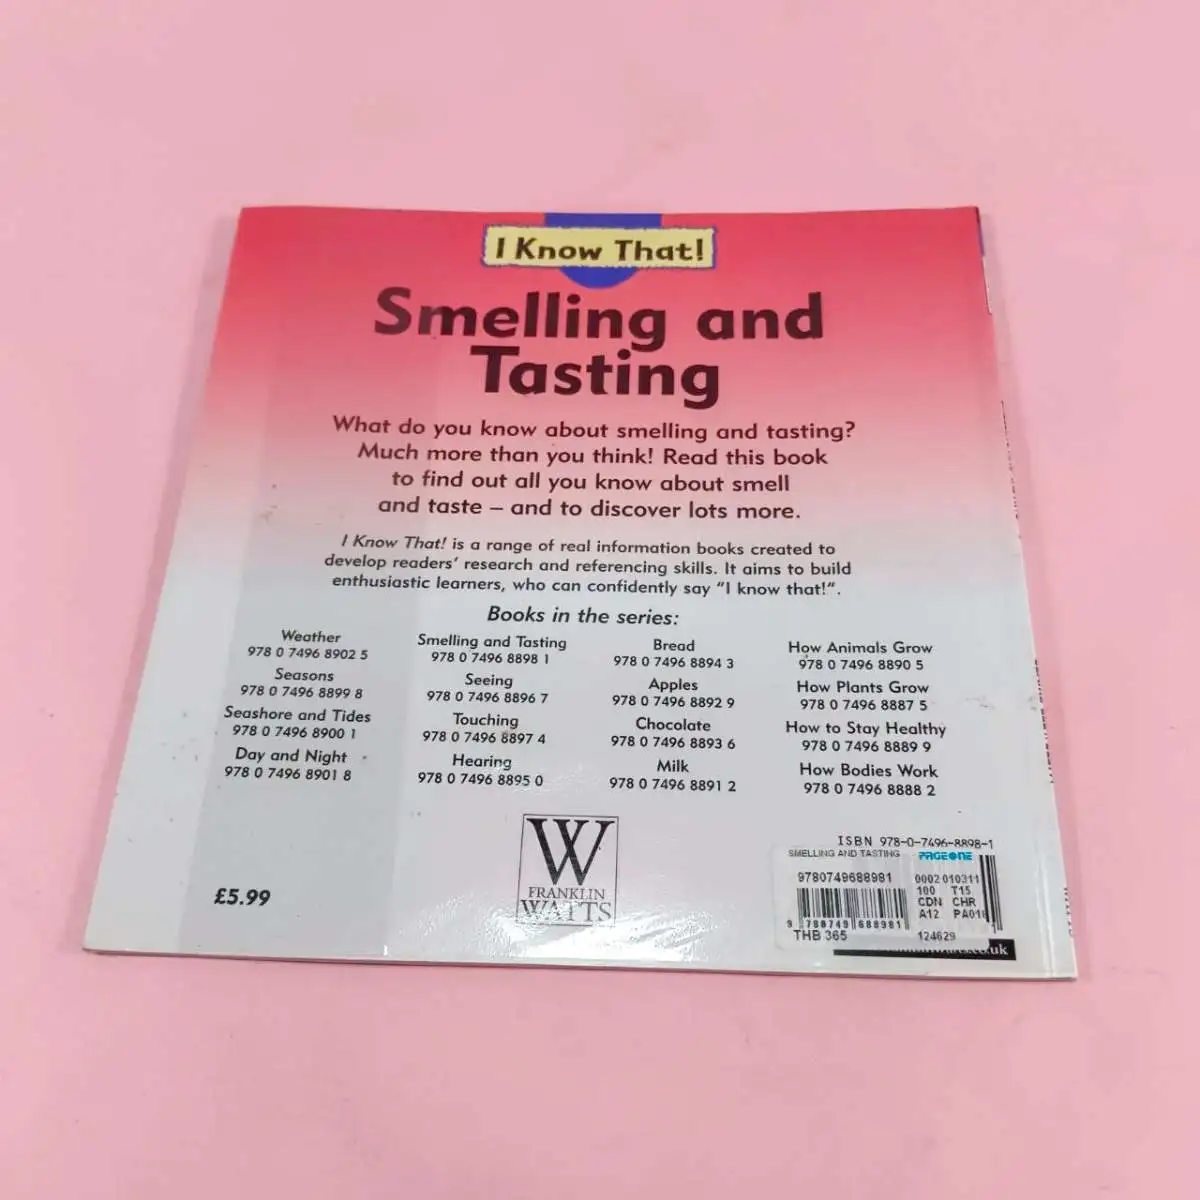 Smelling and Tasting (I Know That)